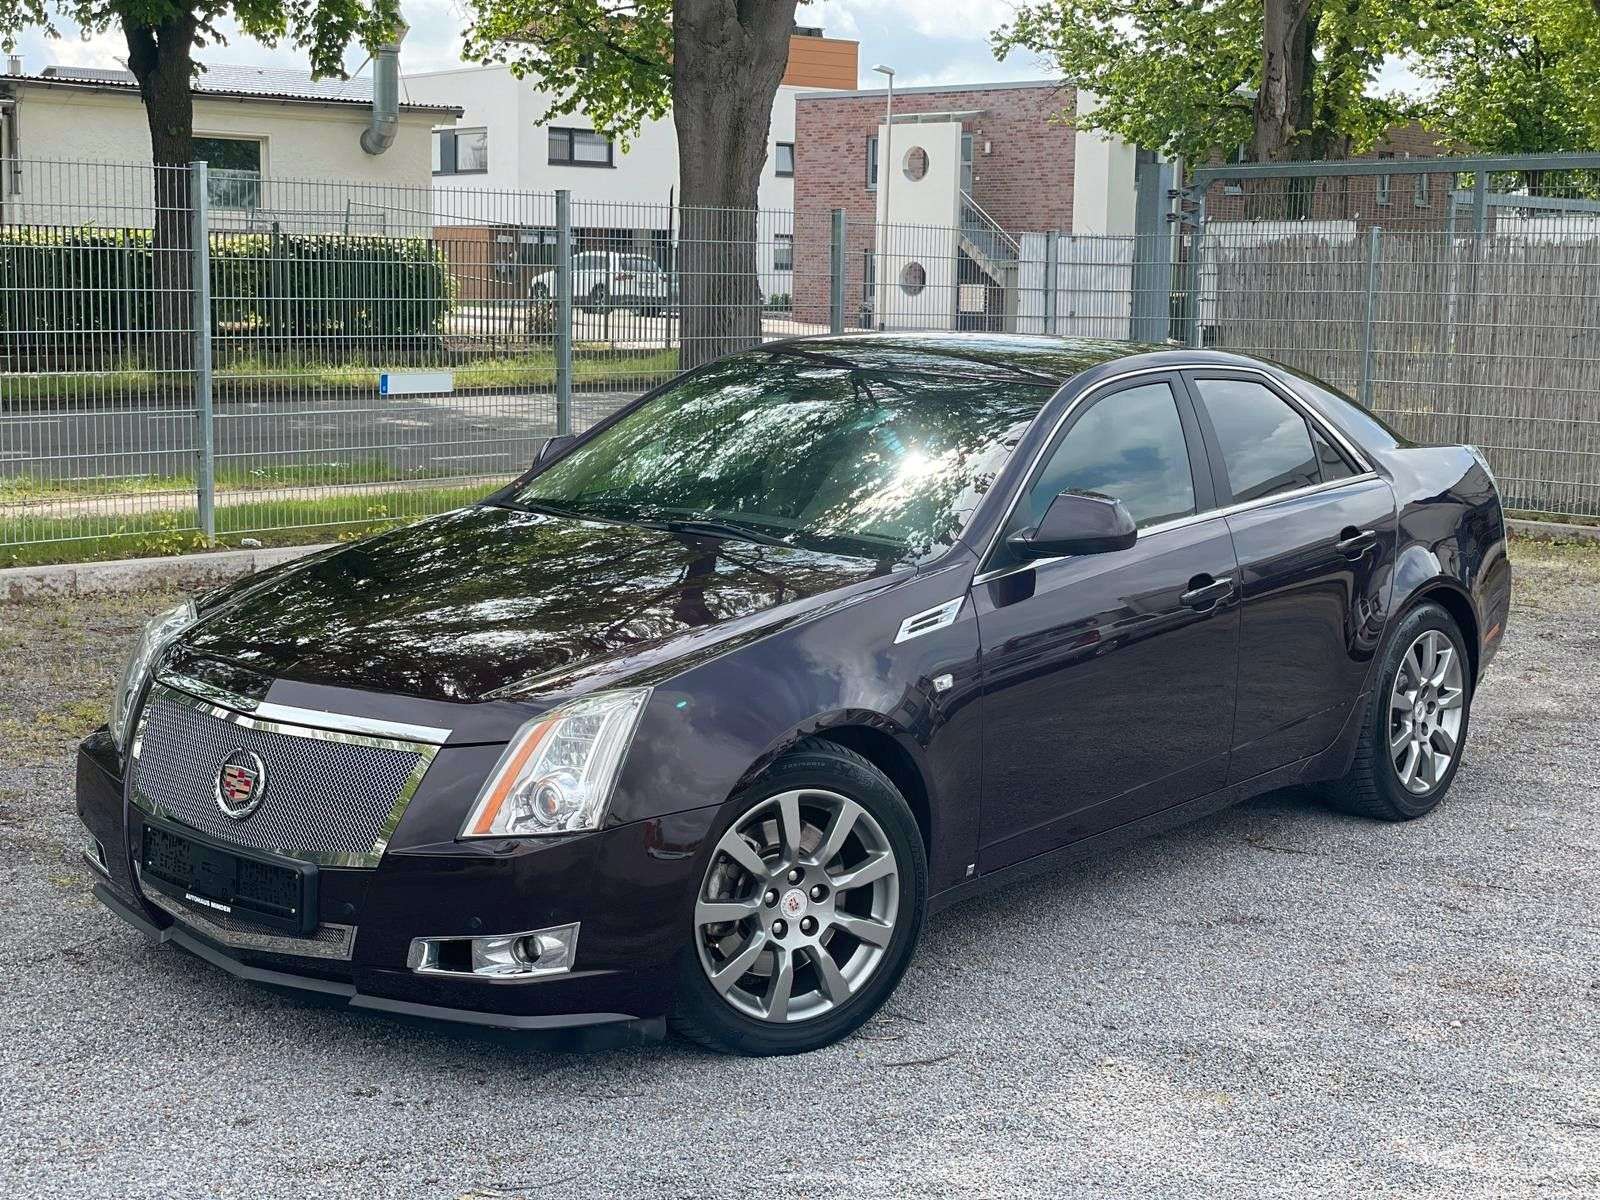 Cadillac CTS Sedan in Red used in Minden for € 13,500.-